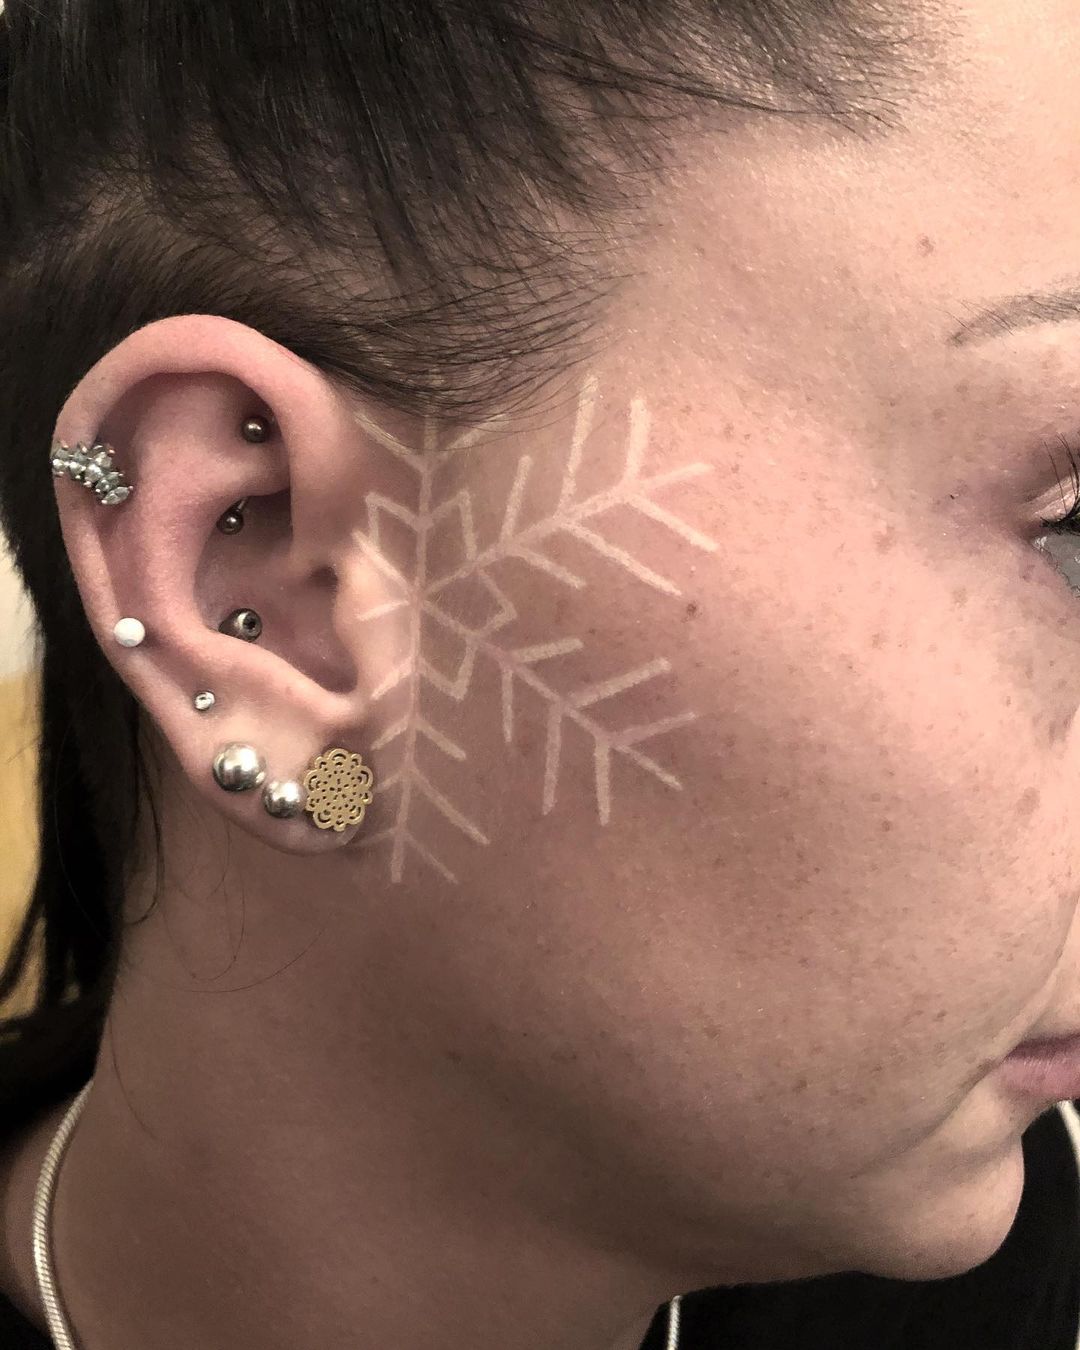 snowflake tattoo on face by